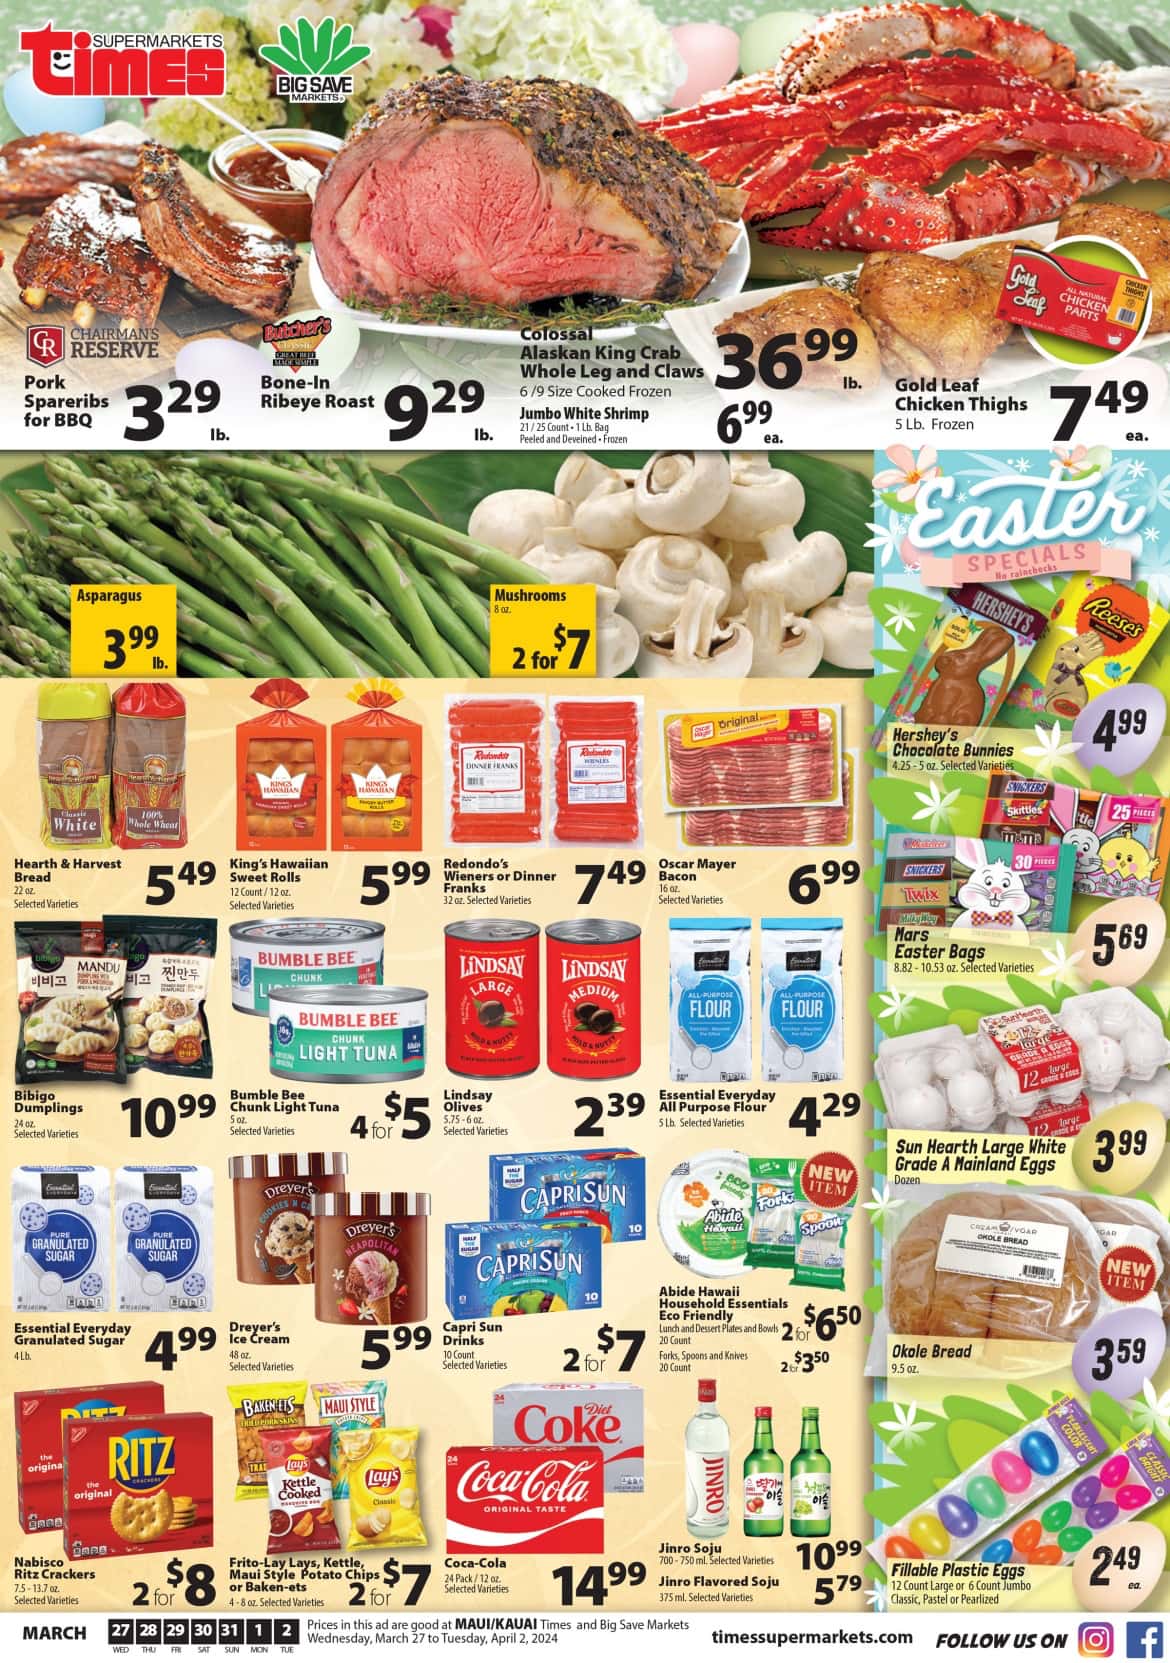 TimesSupermarkets_weekly_ad_032724_01